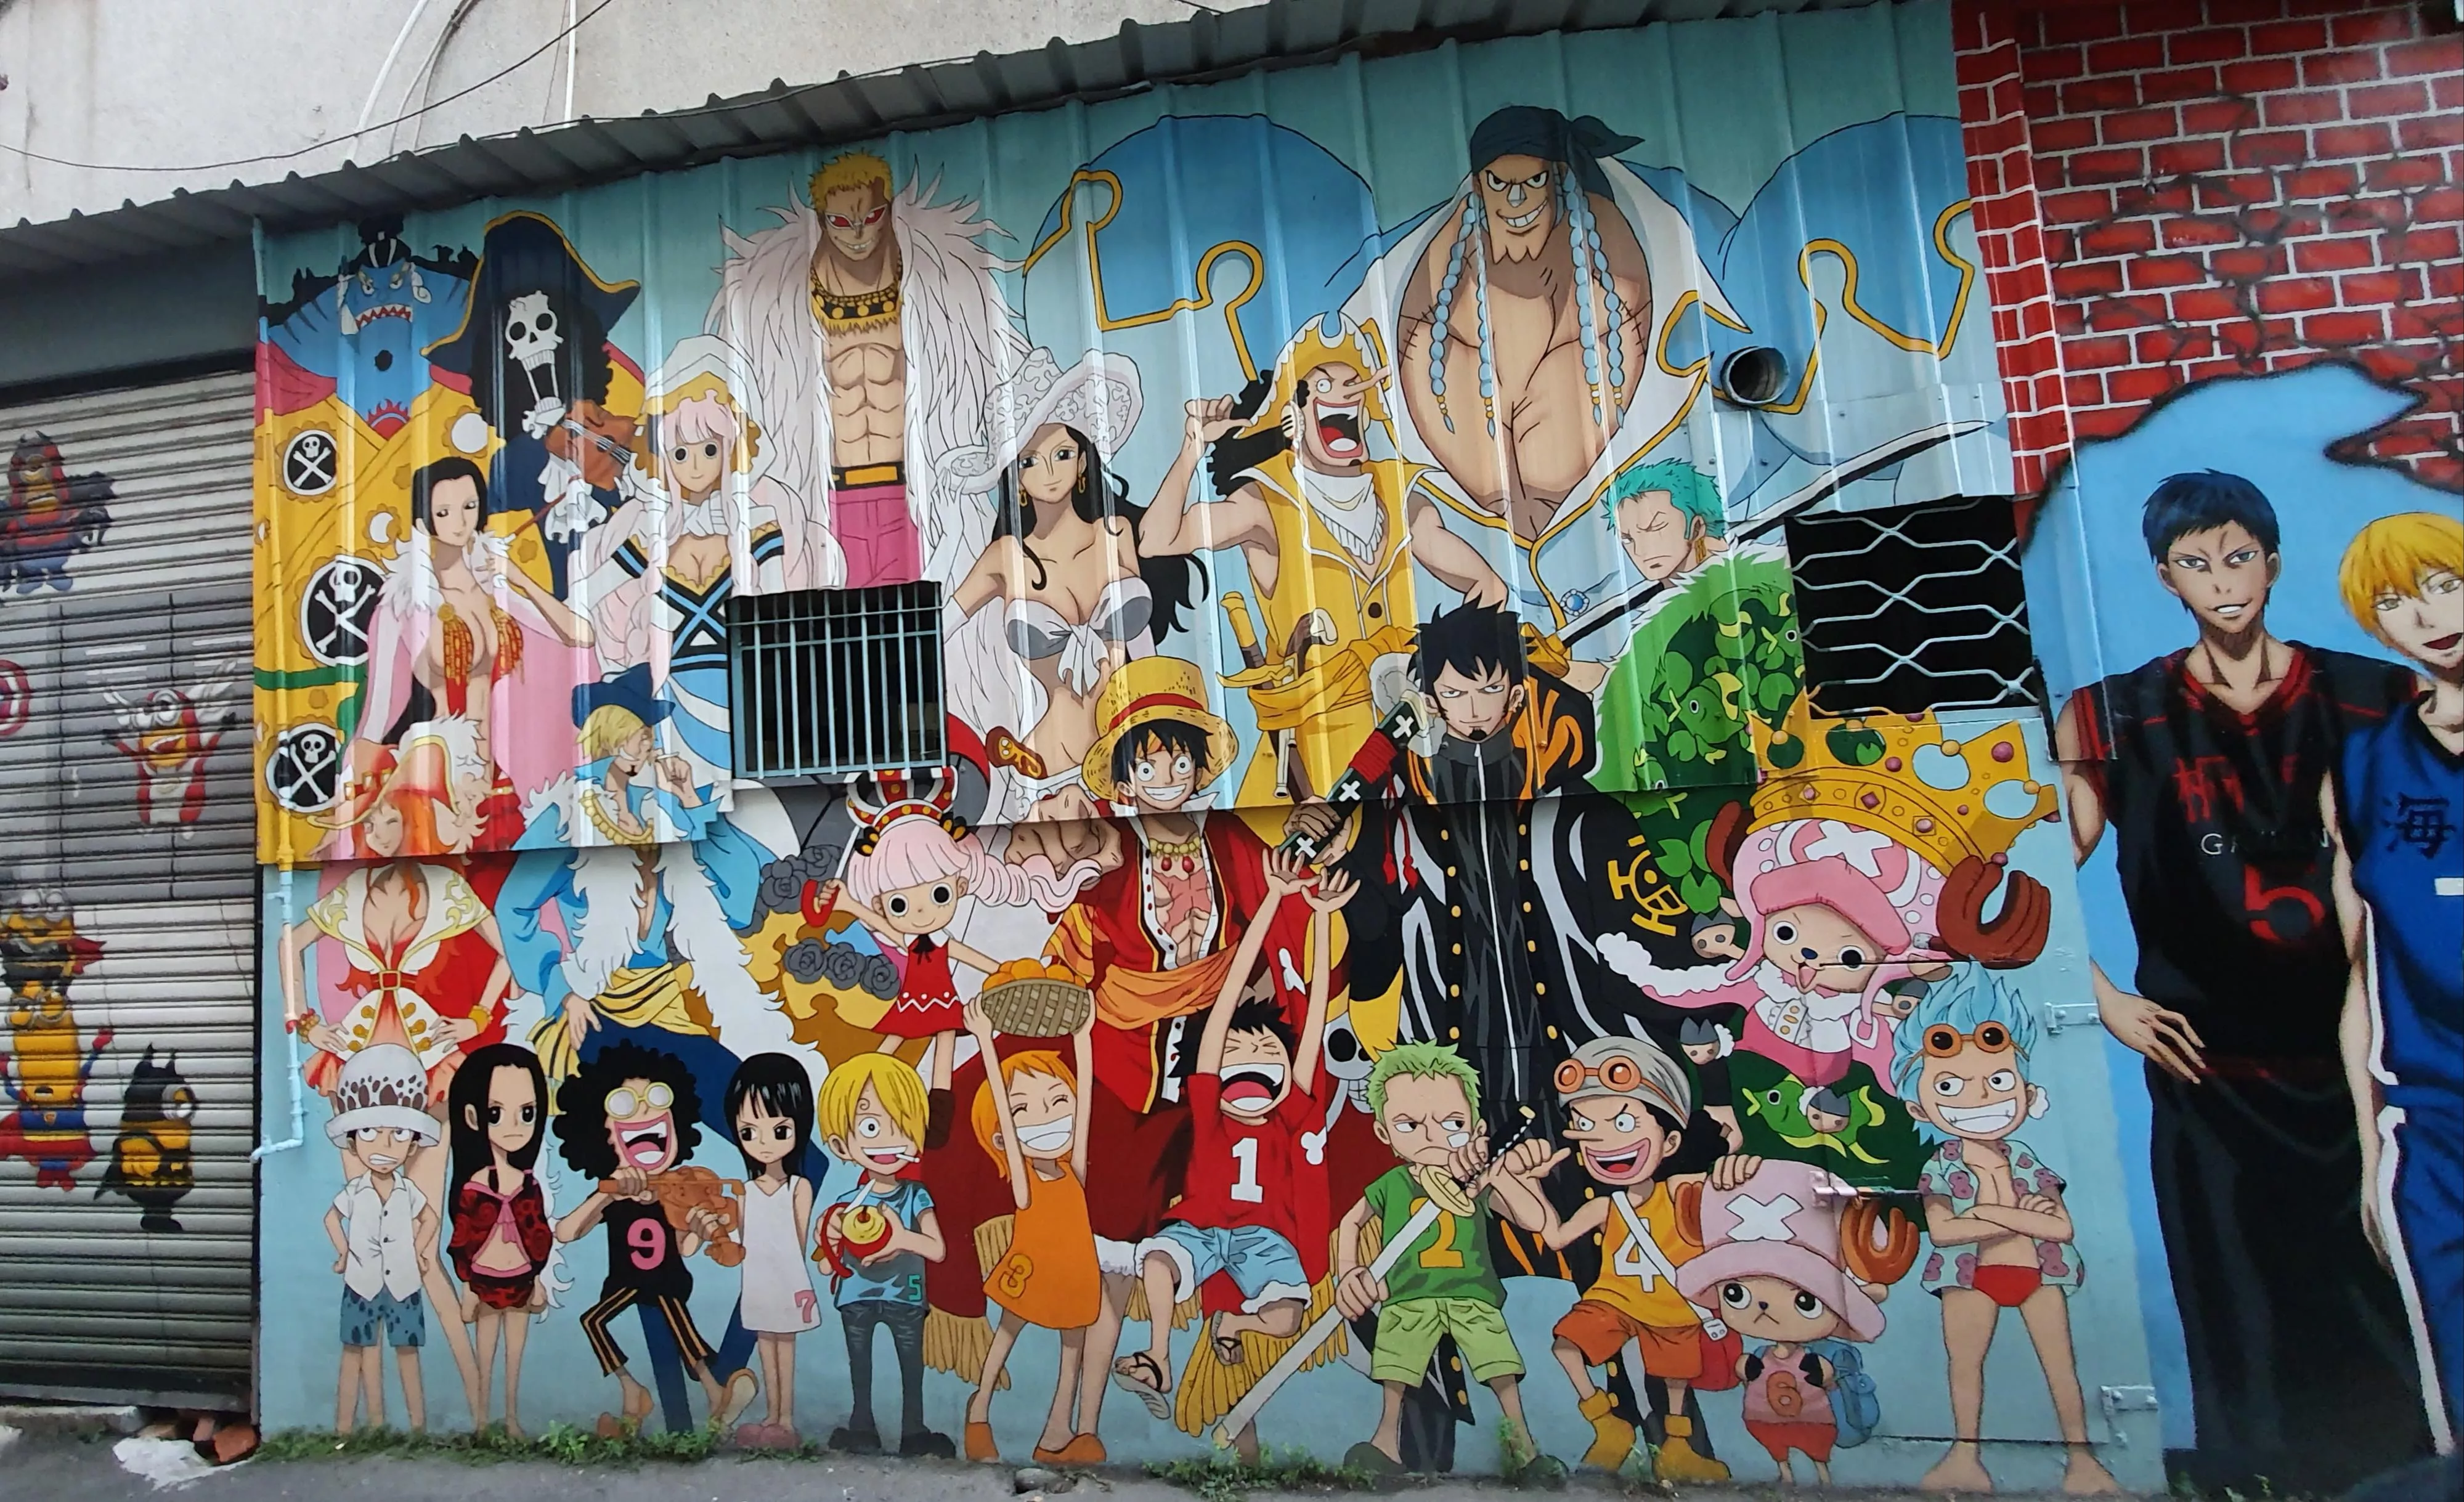 Painted Animation Lane in Taiwan, East Asia | Architecture - Rated 3.3